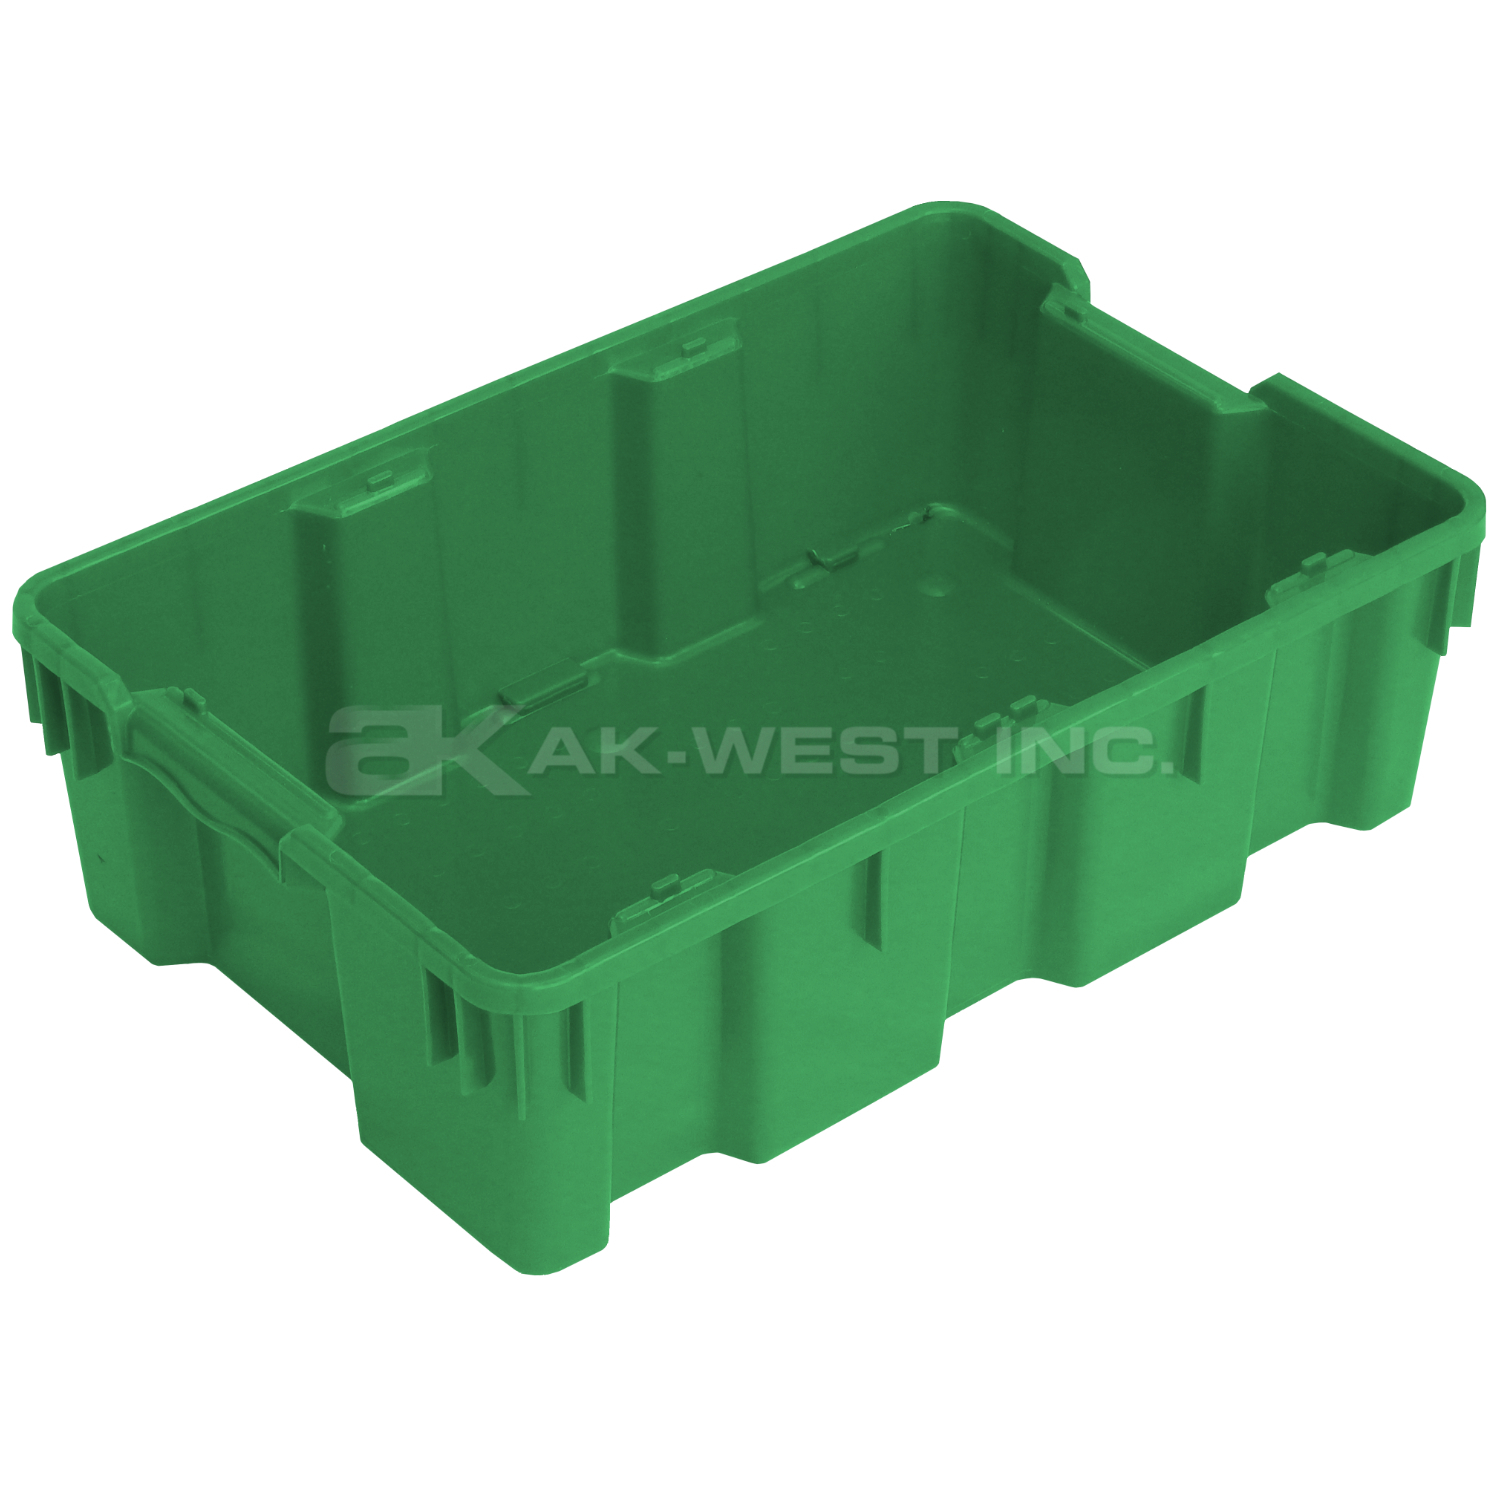 Green, 24"L x 16"W x 7"H Stack and Nest Container w/ Solid Sides and Base